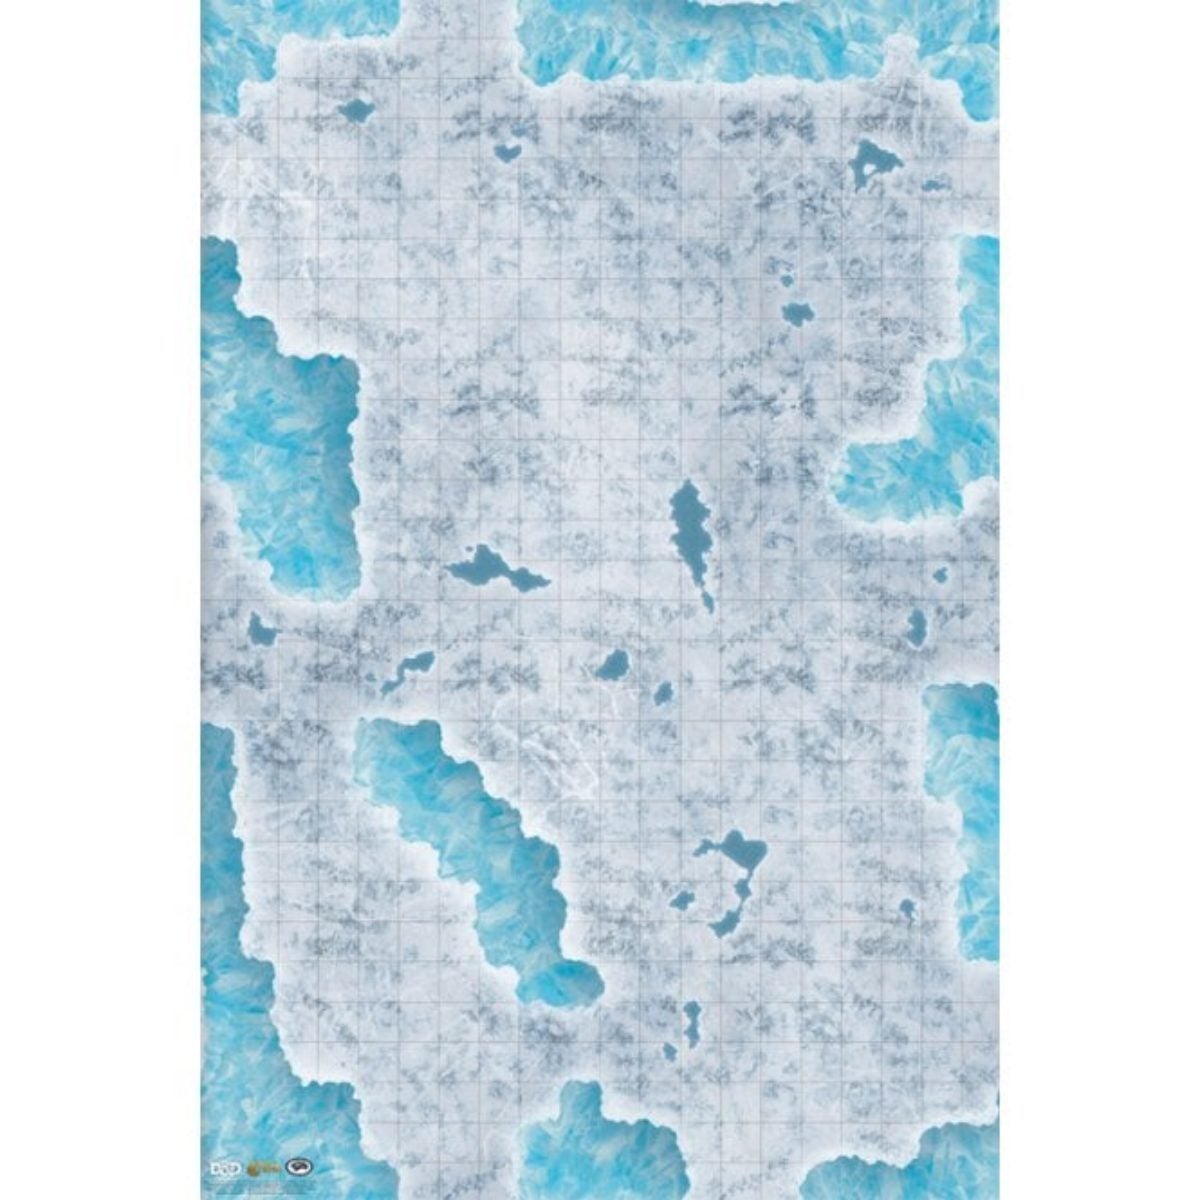 D&D Icewind Dale Rime of the Frostmaiden Ice Caverns Map